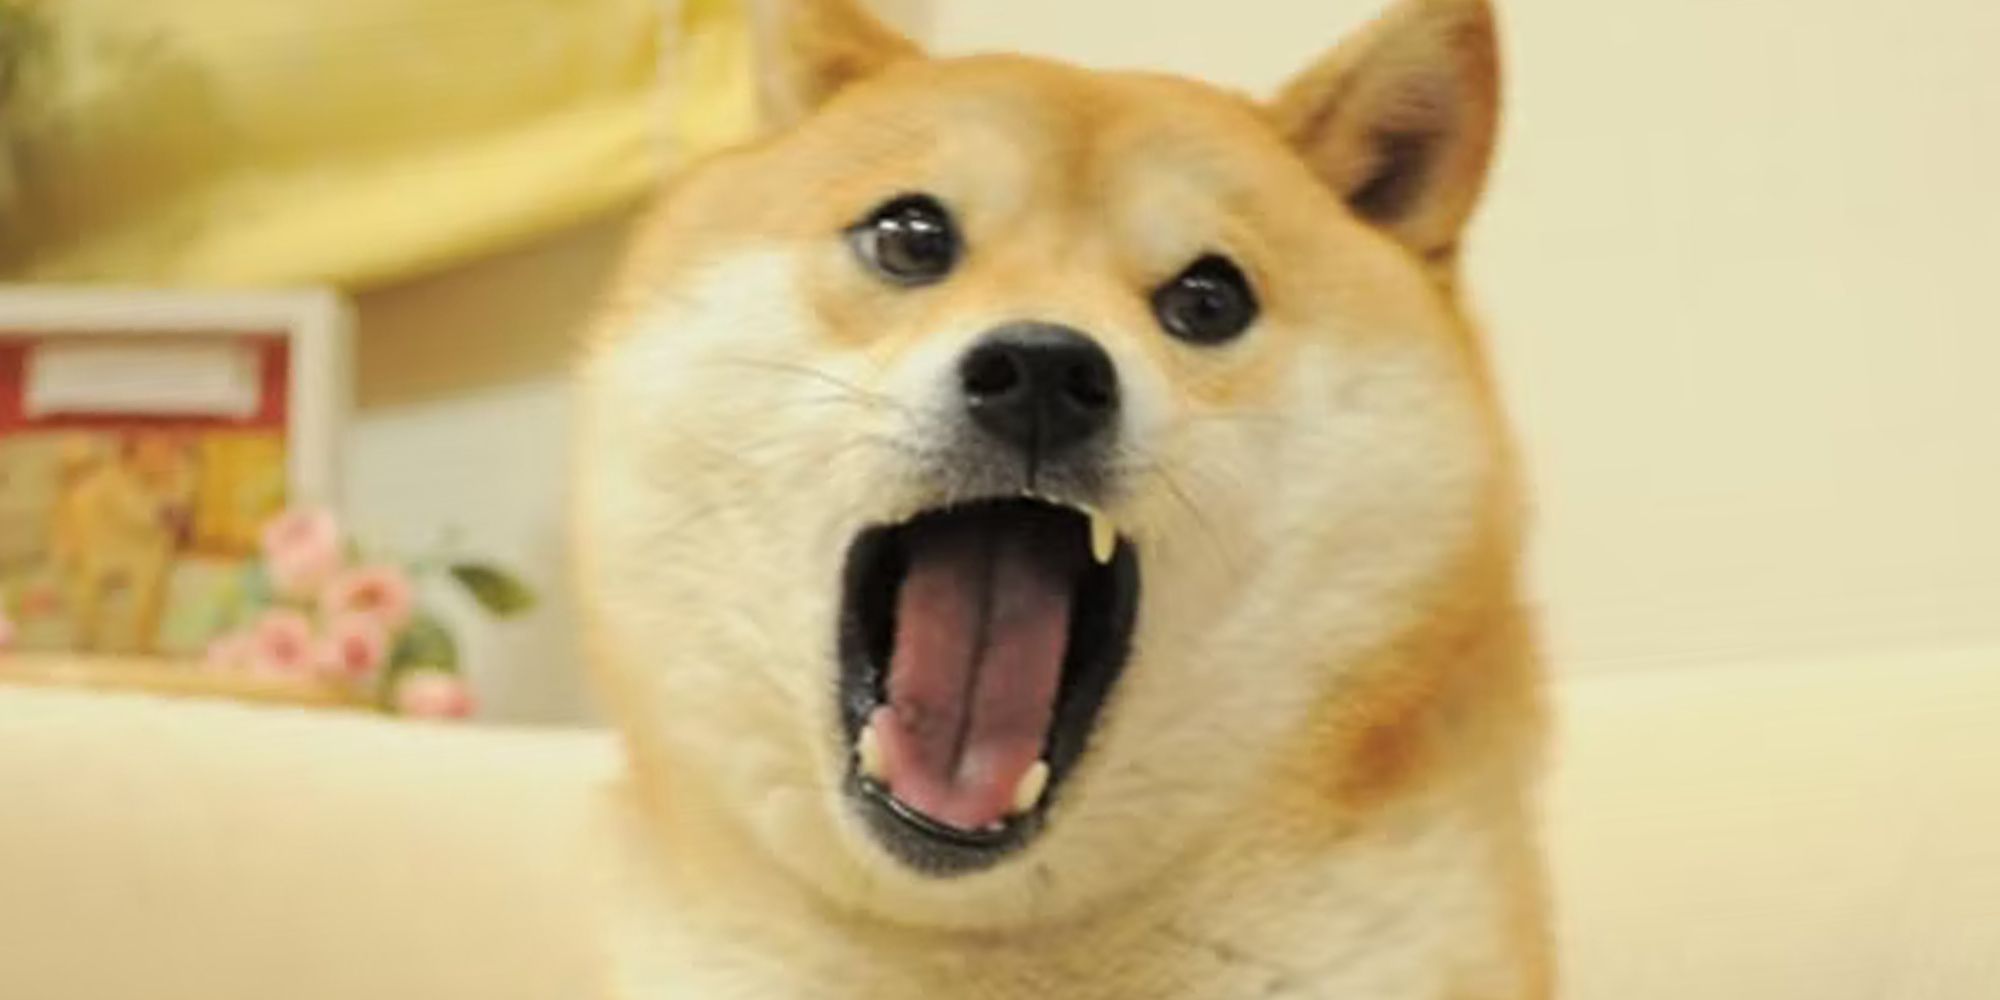 Kabosu, The Famous Shiba Inu In The Doge Memes, Has Cancer